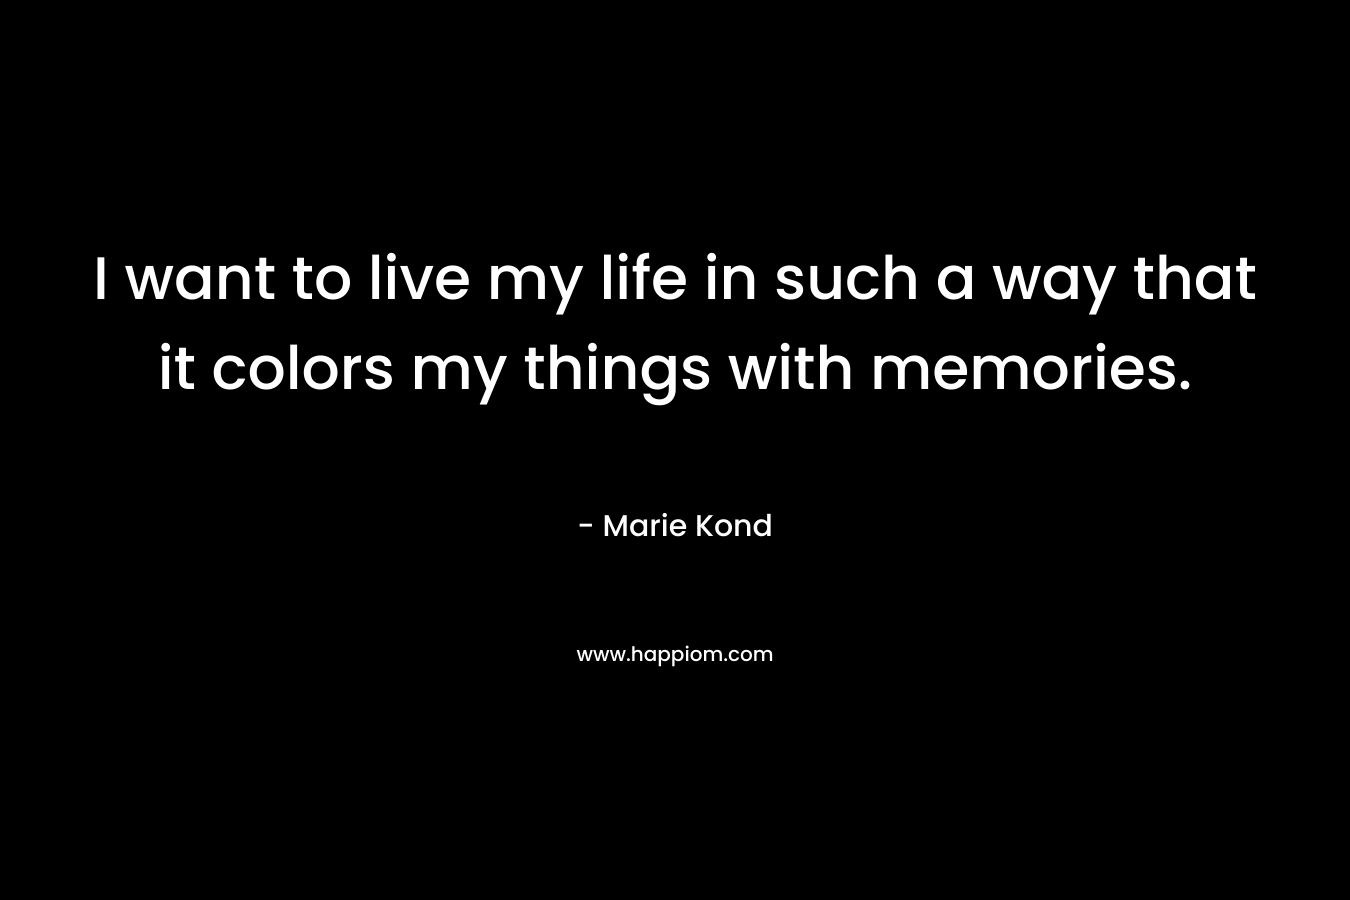 I want to live my life in such a way that it colors my things with memories. – Marie Kond